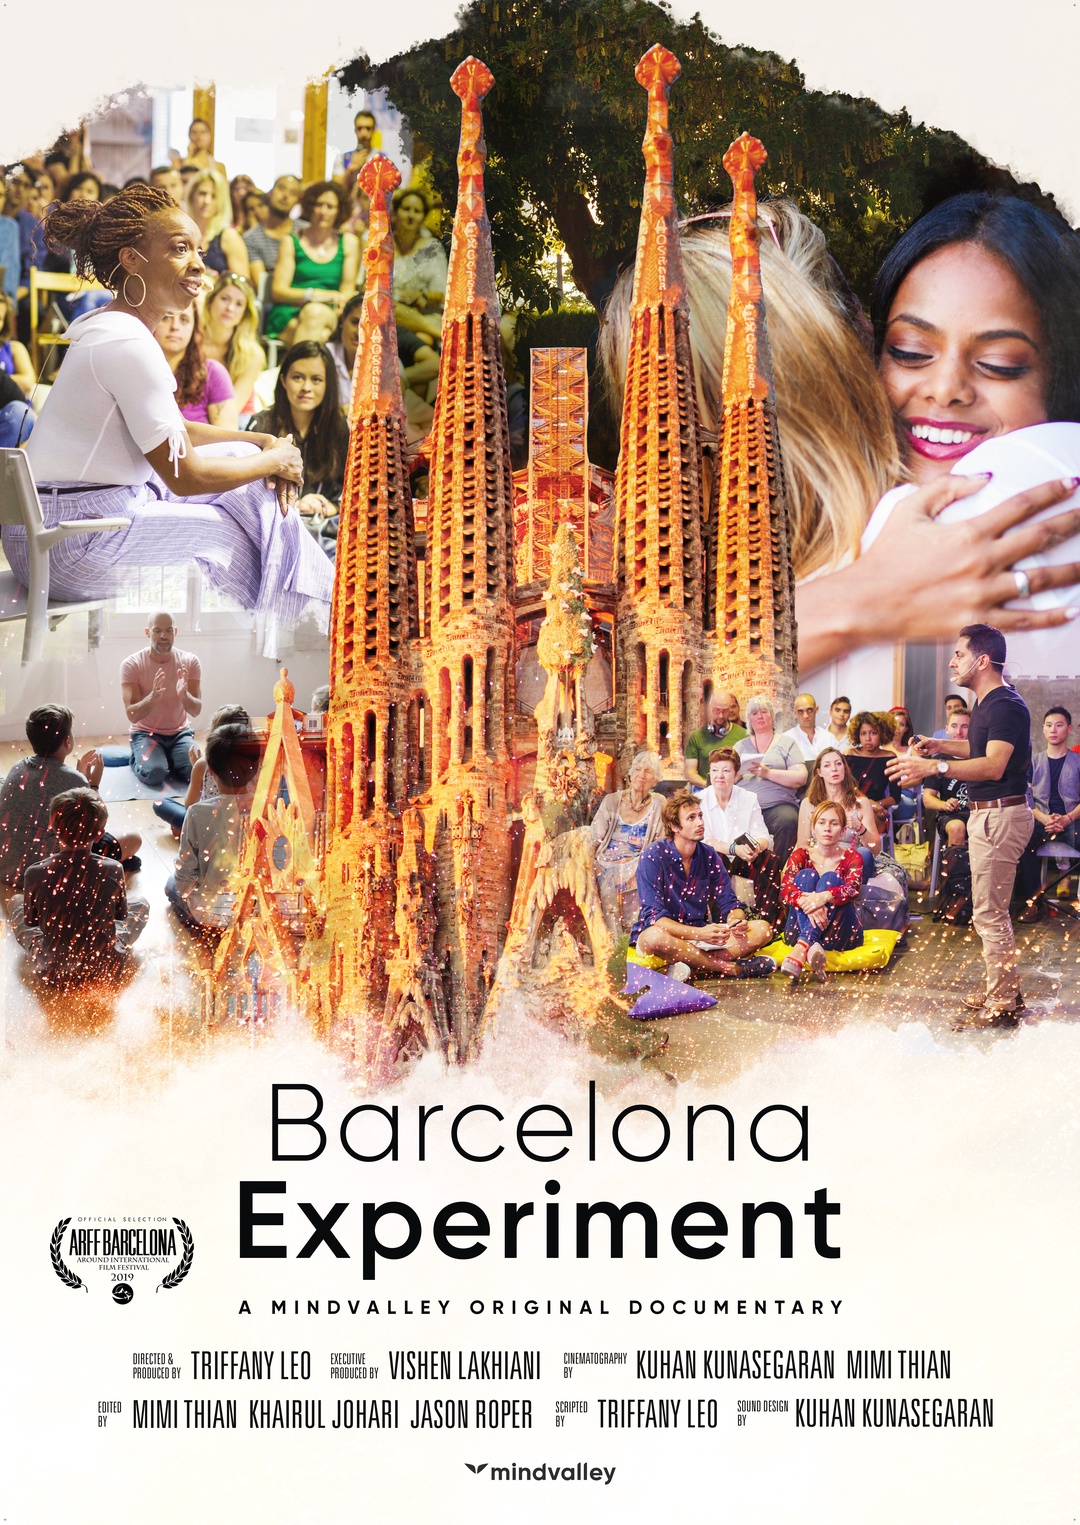 The Barcelona Experiment